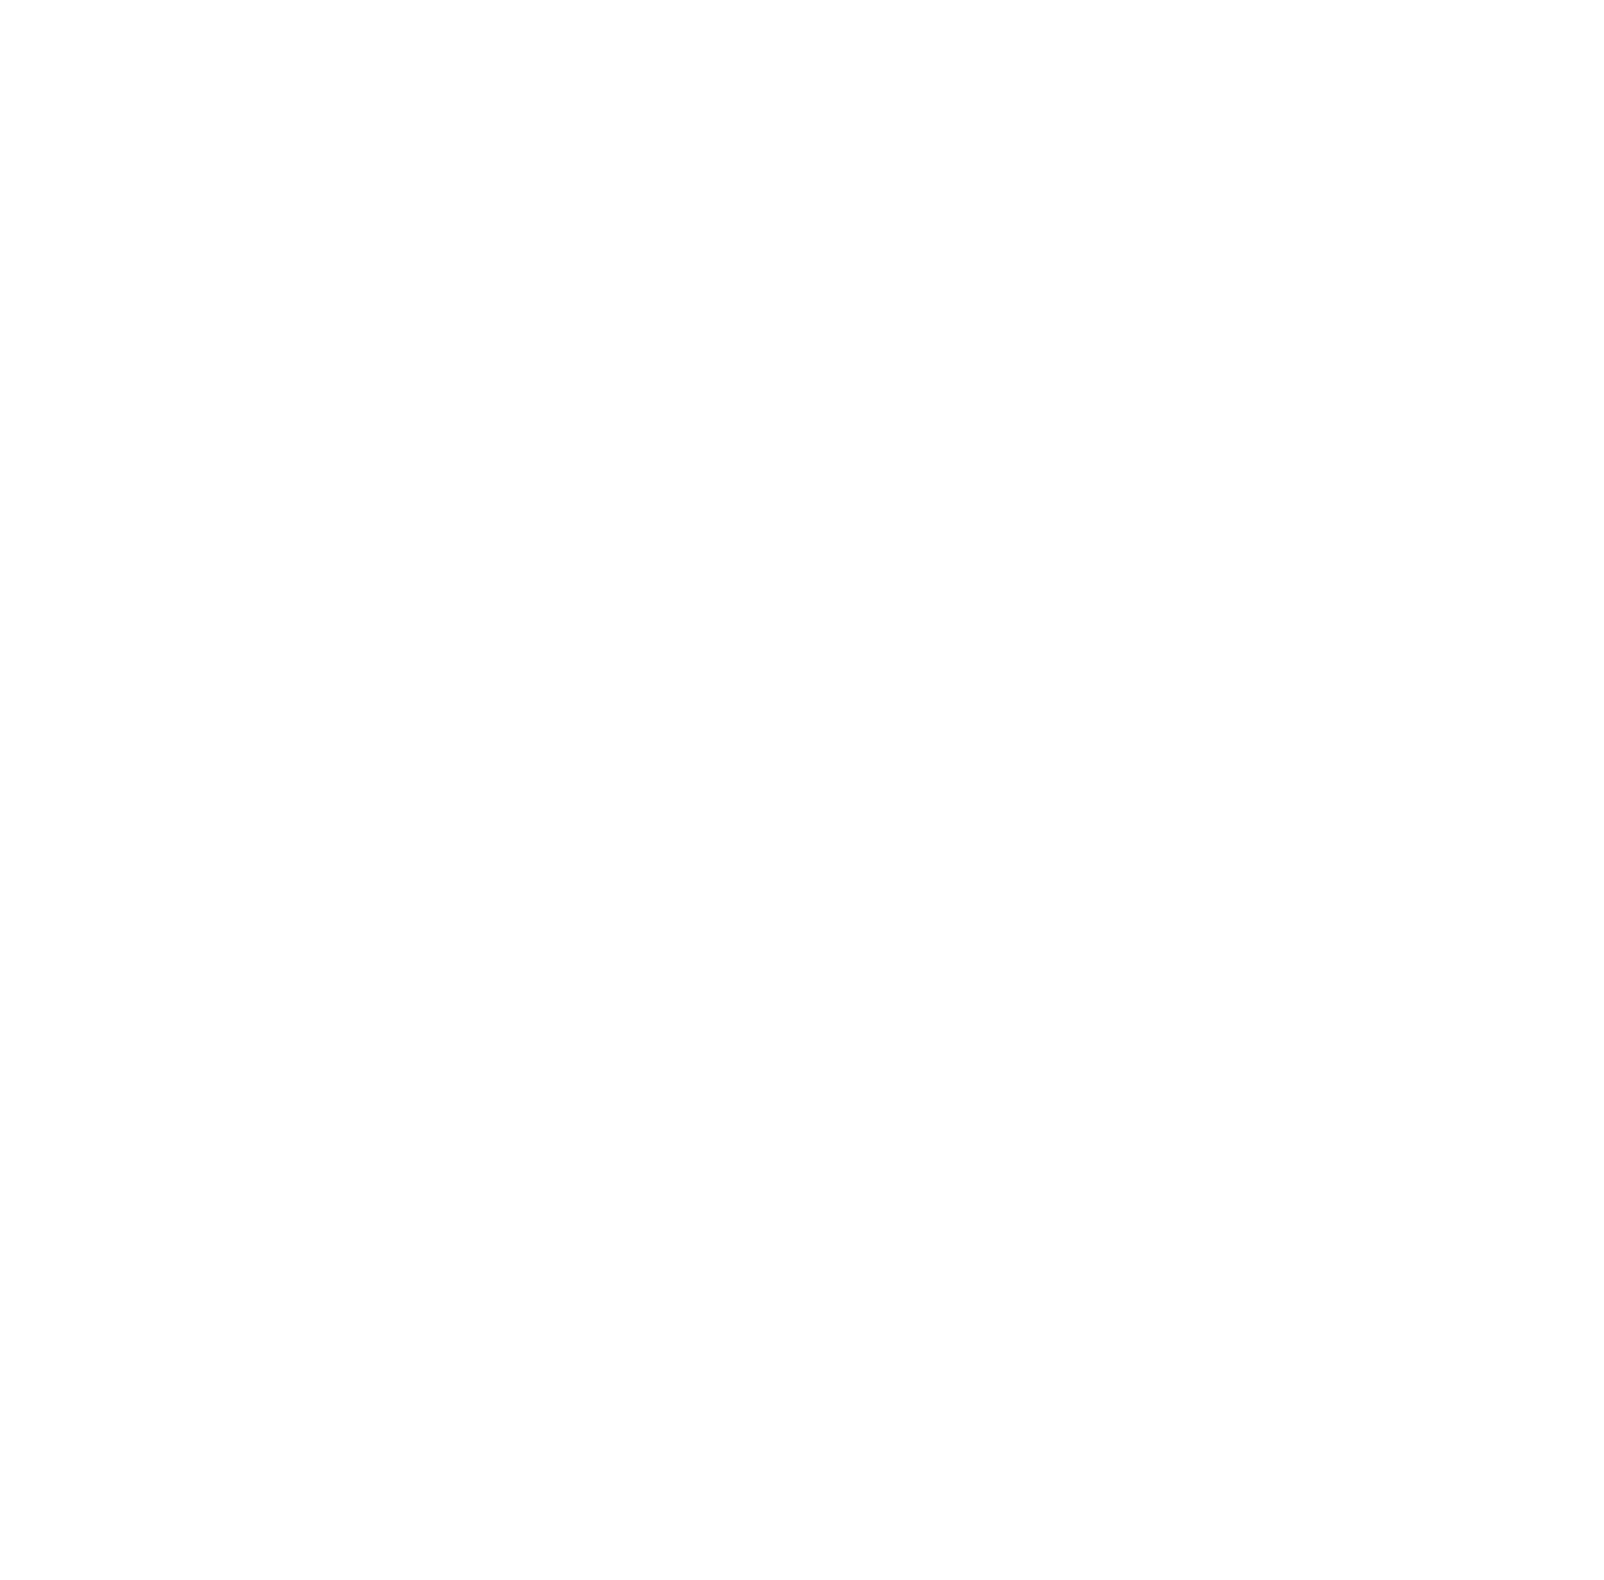 Qatar Electricity & Water Company logo for dark backgrounds (transparent PNG)